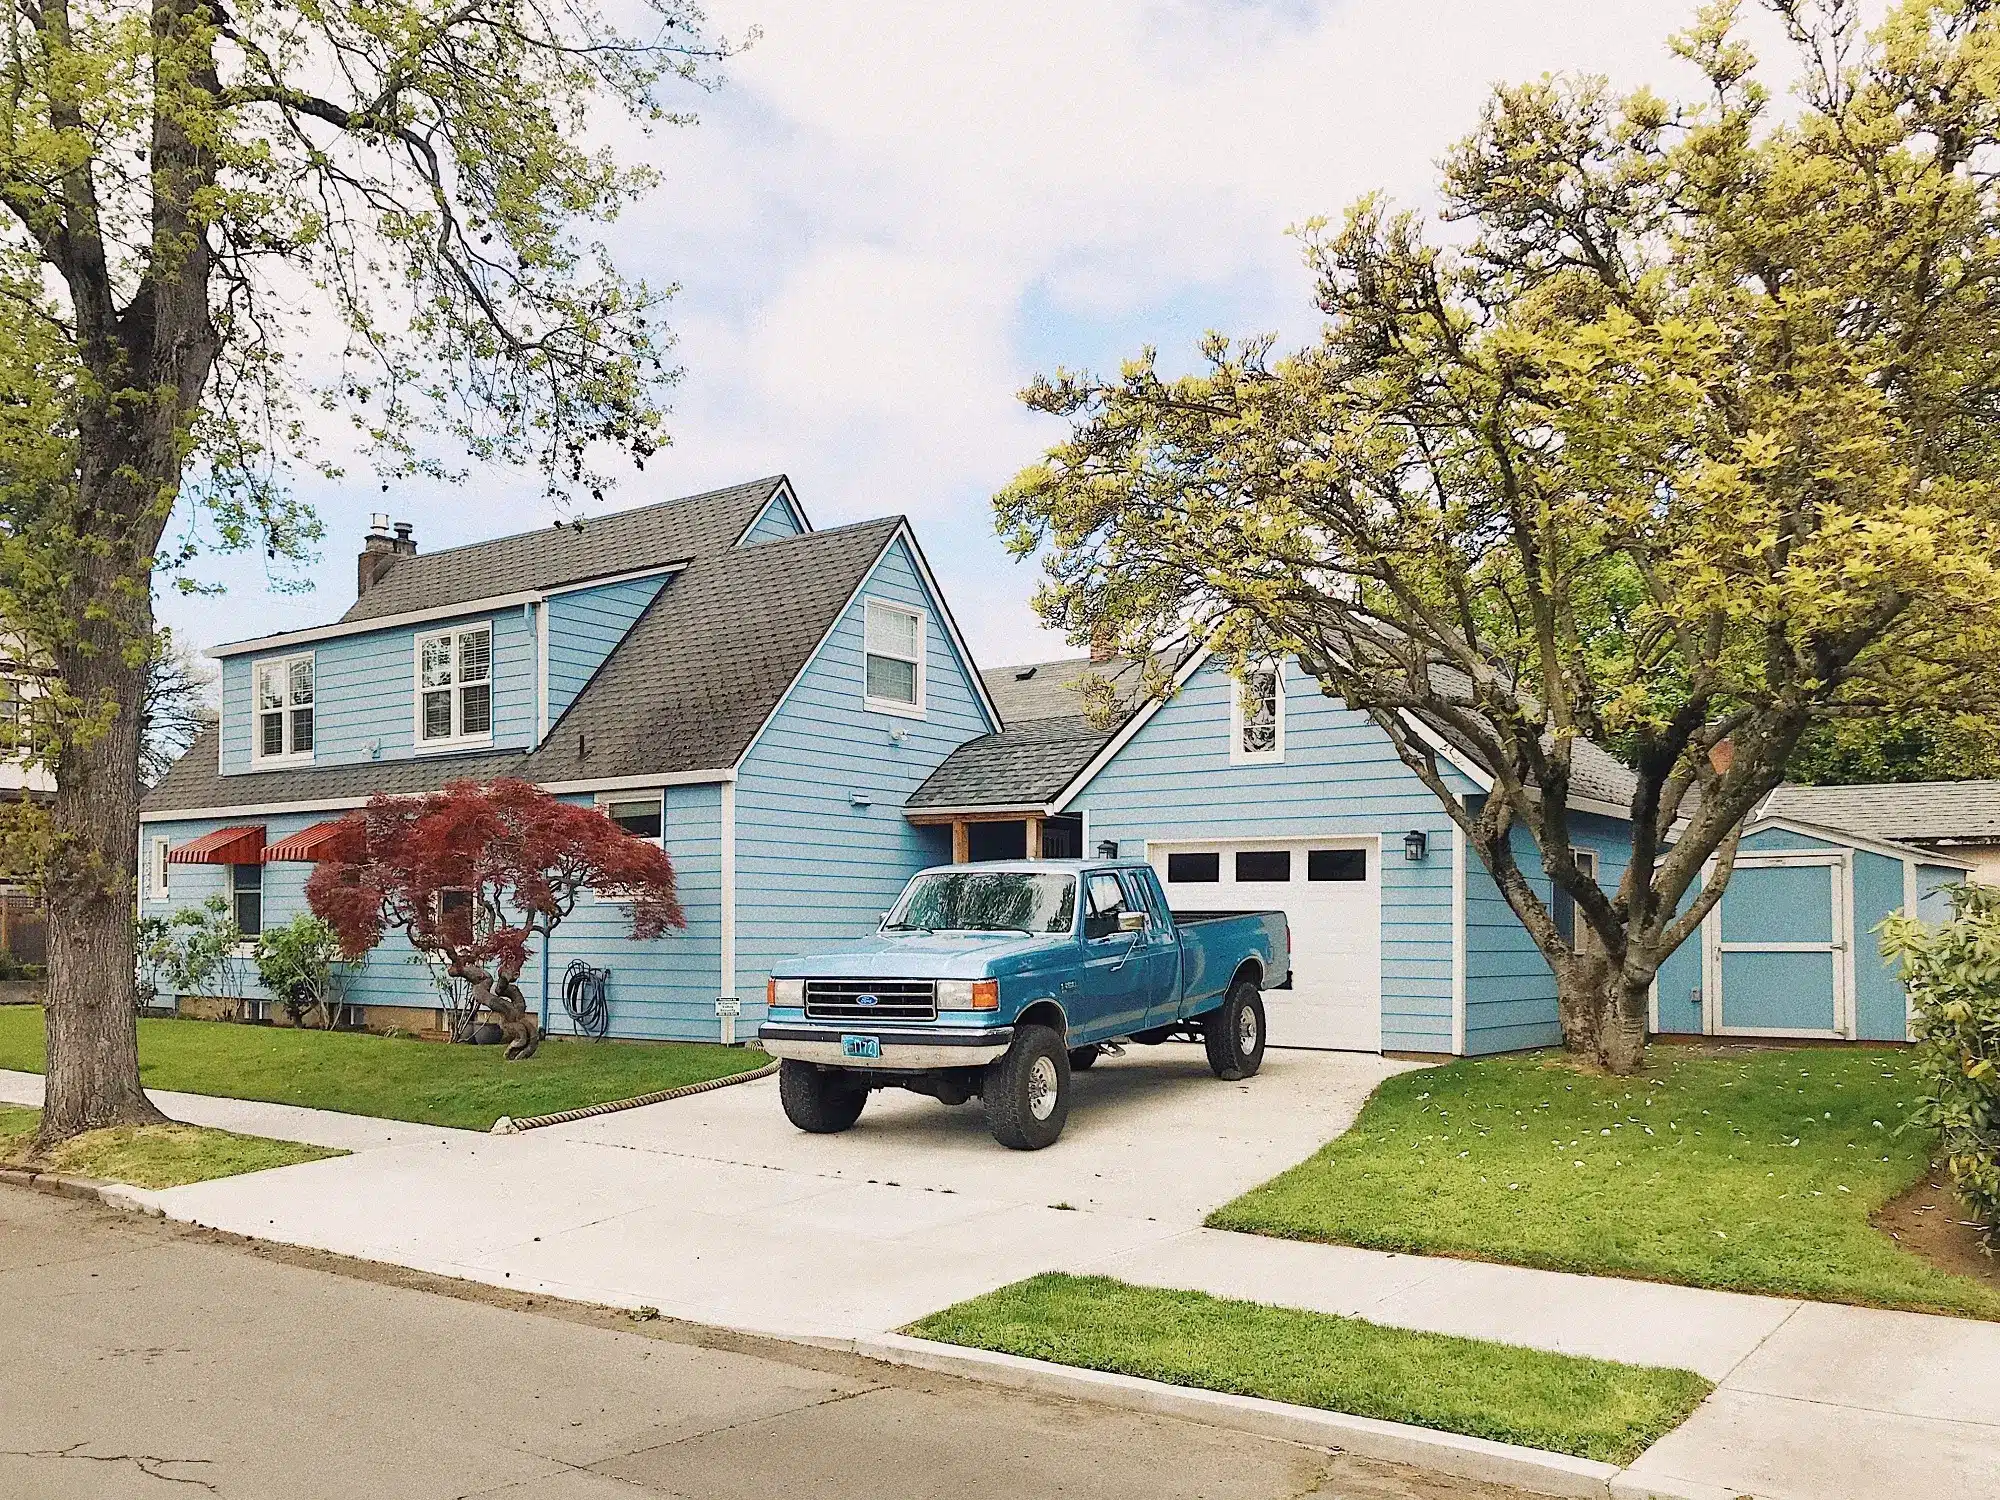 A suburban home with a vintage Ford pickup in its driveway, representing the concept of property fringe benefit.